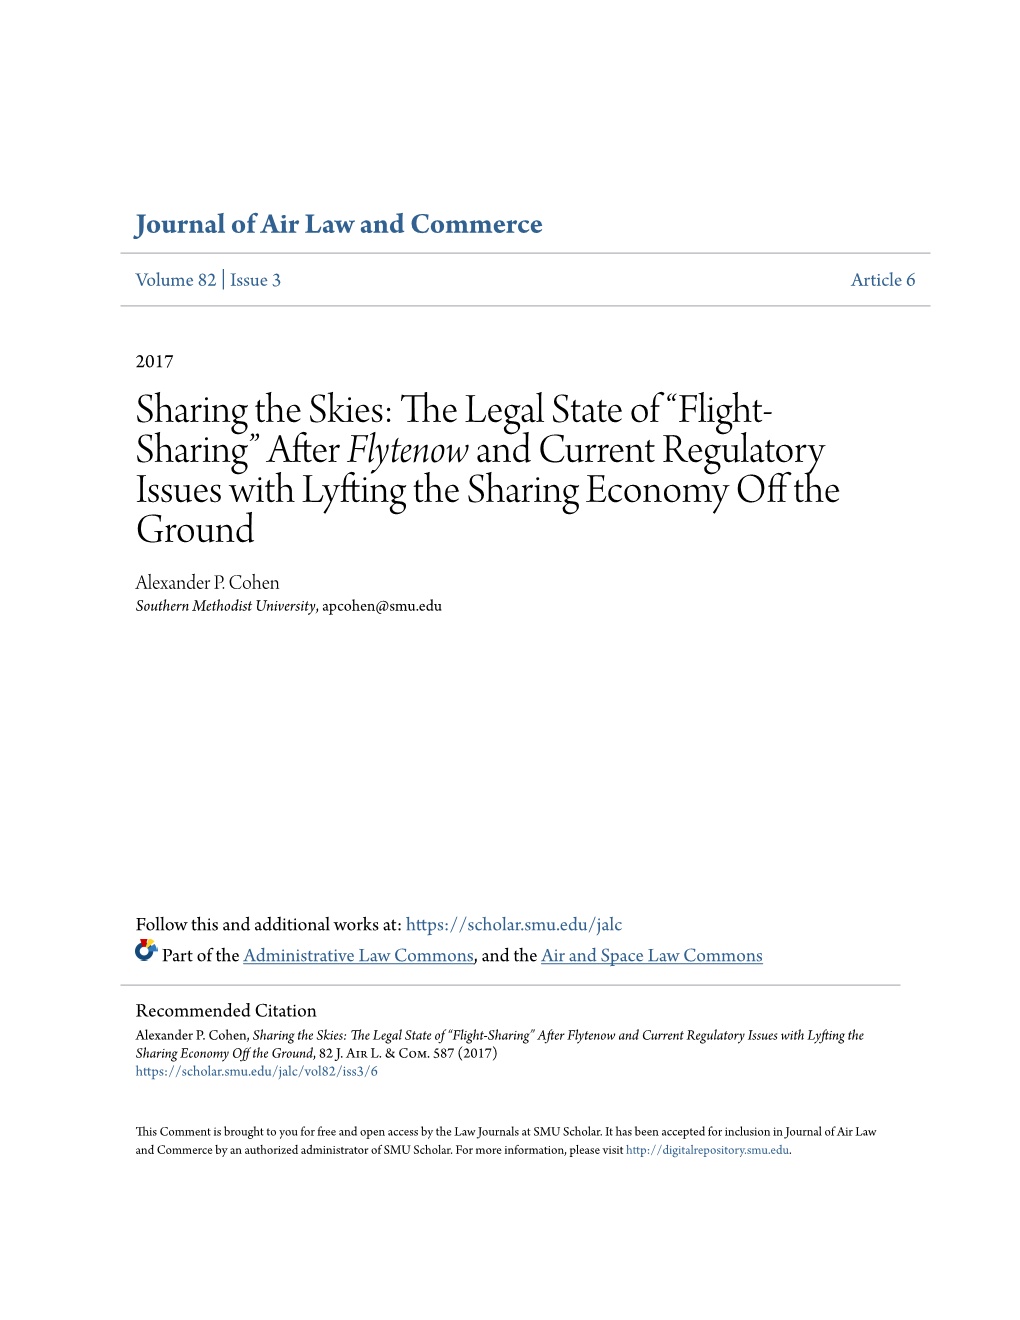 Sharing the Skies: the Legal State of “Flight- Sharing” After Flytenow and Current Regulatory Issues with Lyfting the Sharing Economy Off the Ground Alexander P